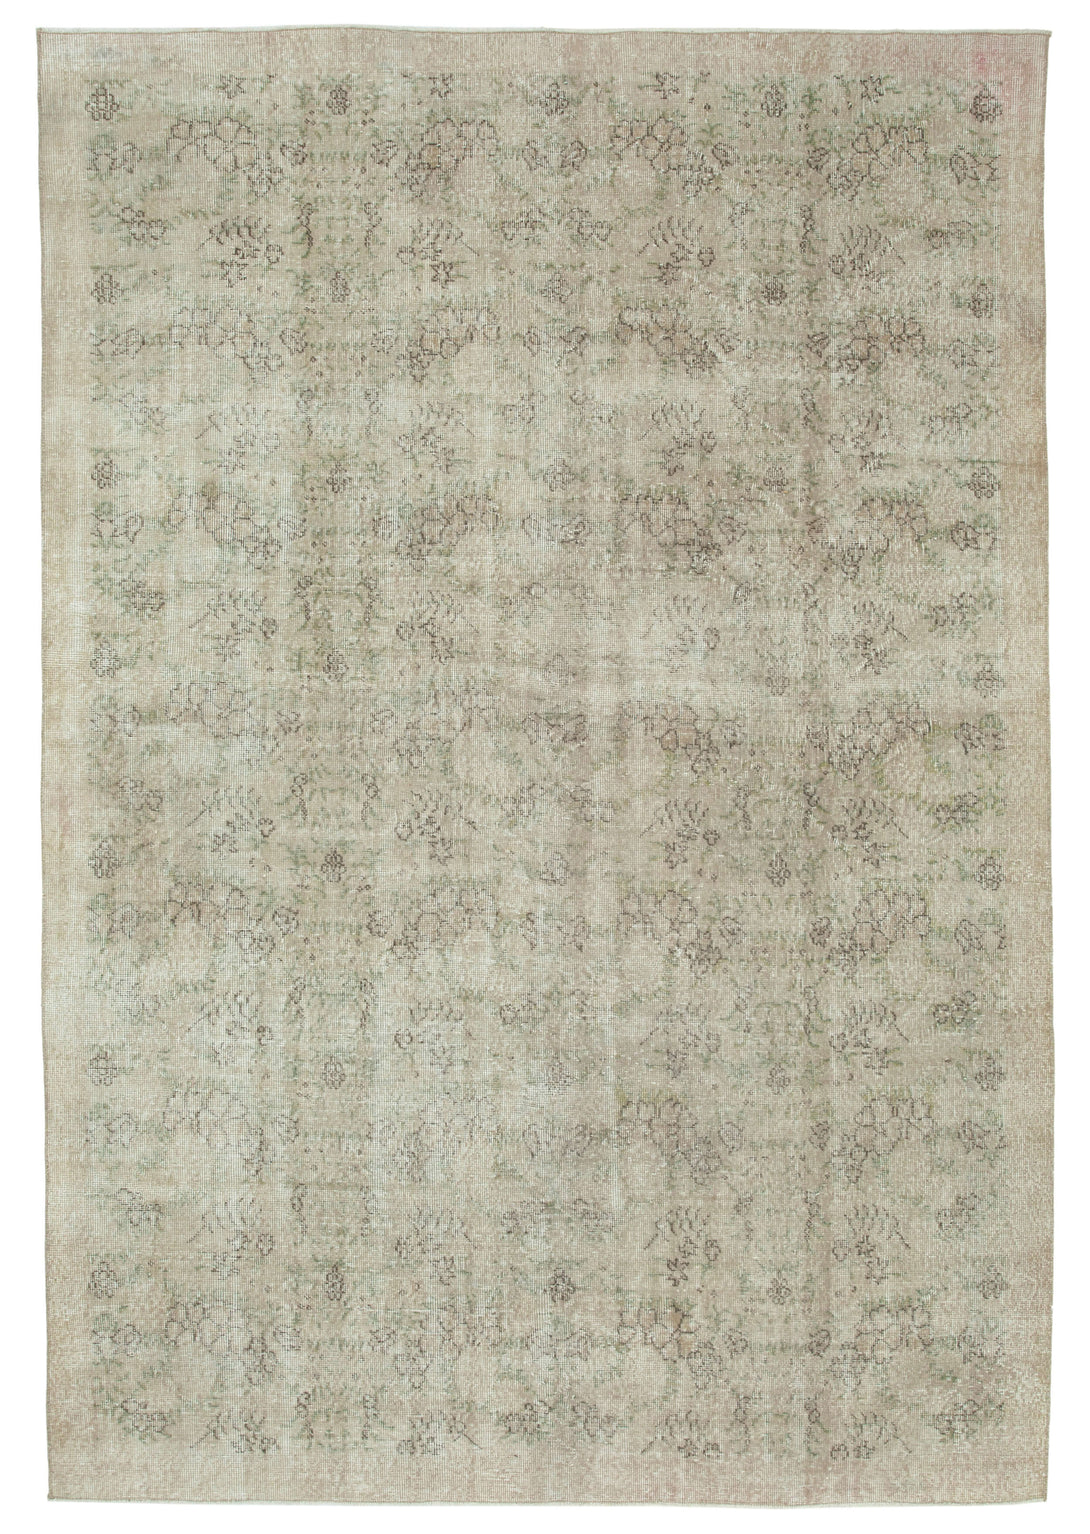 Handmade White Wash Area Rug > Design# OL-AC-25136 > Size: 6'-10" x 10'-0", Carpet Culture Rugs, Handmade Rugs, NYC Rugs, New Rugs, Shop Rugs, Rug Store, Outlet Rugs, SoHo Rugs, Rugs in USA